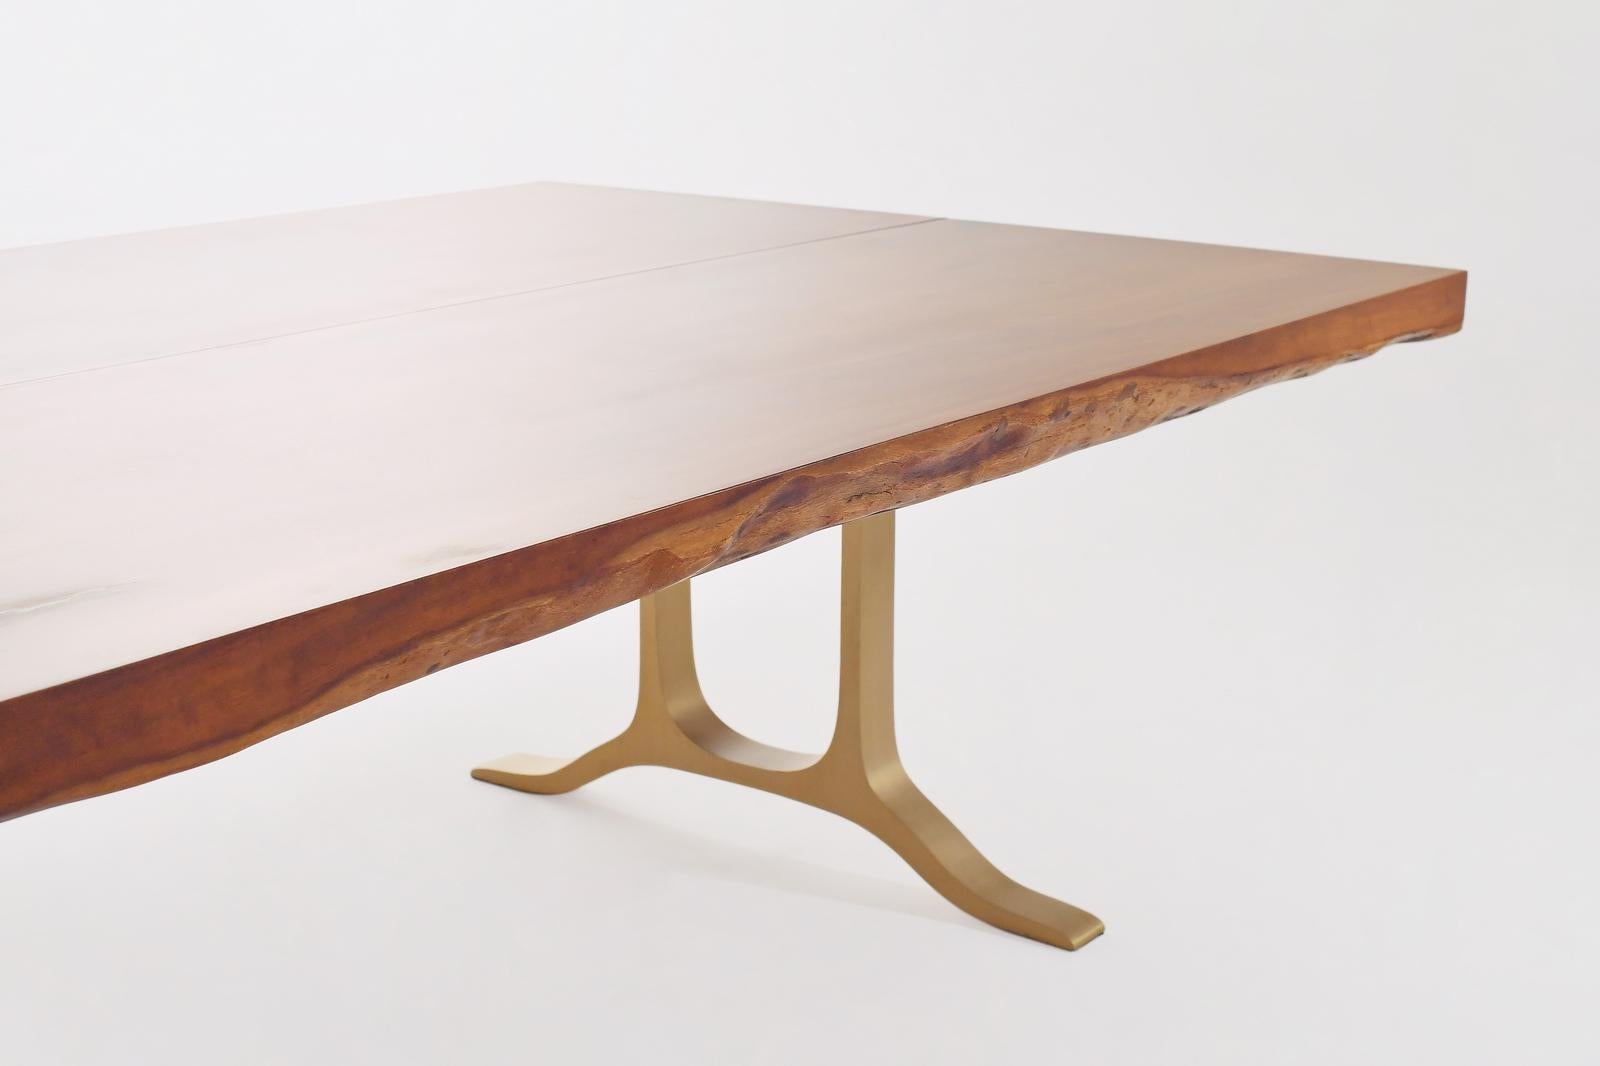 Bespoke Grand Table, Antique Hardwood, Brass Base, by P. Tendercool  For Sale 2